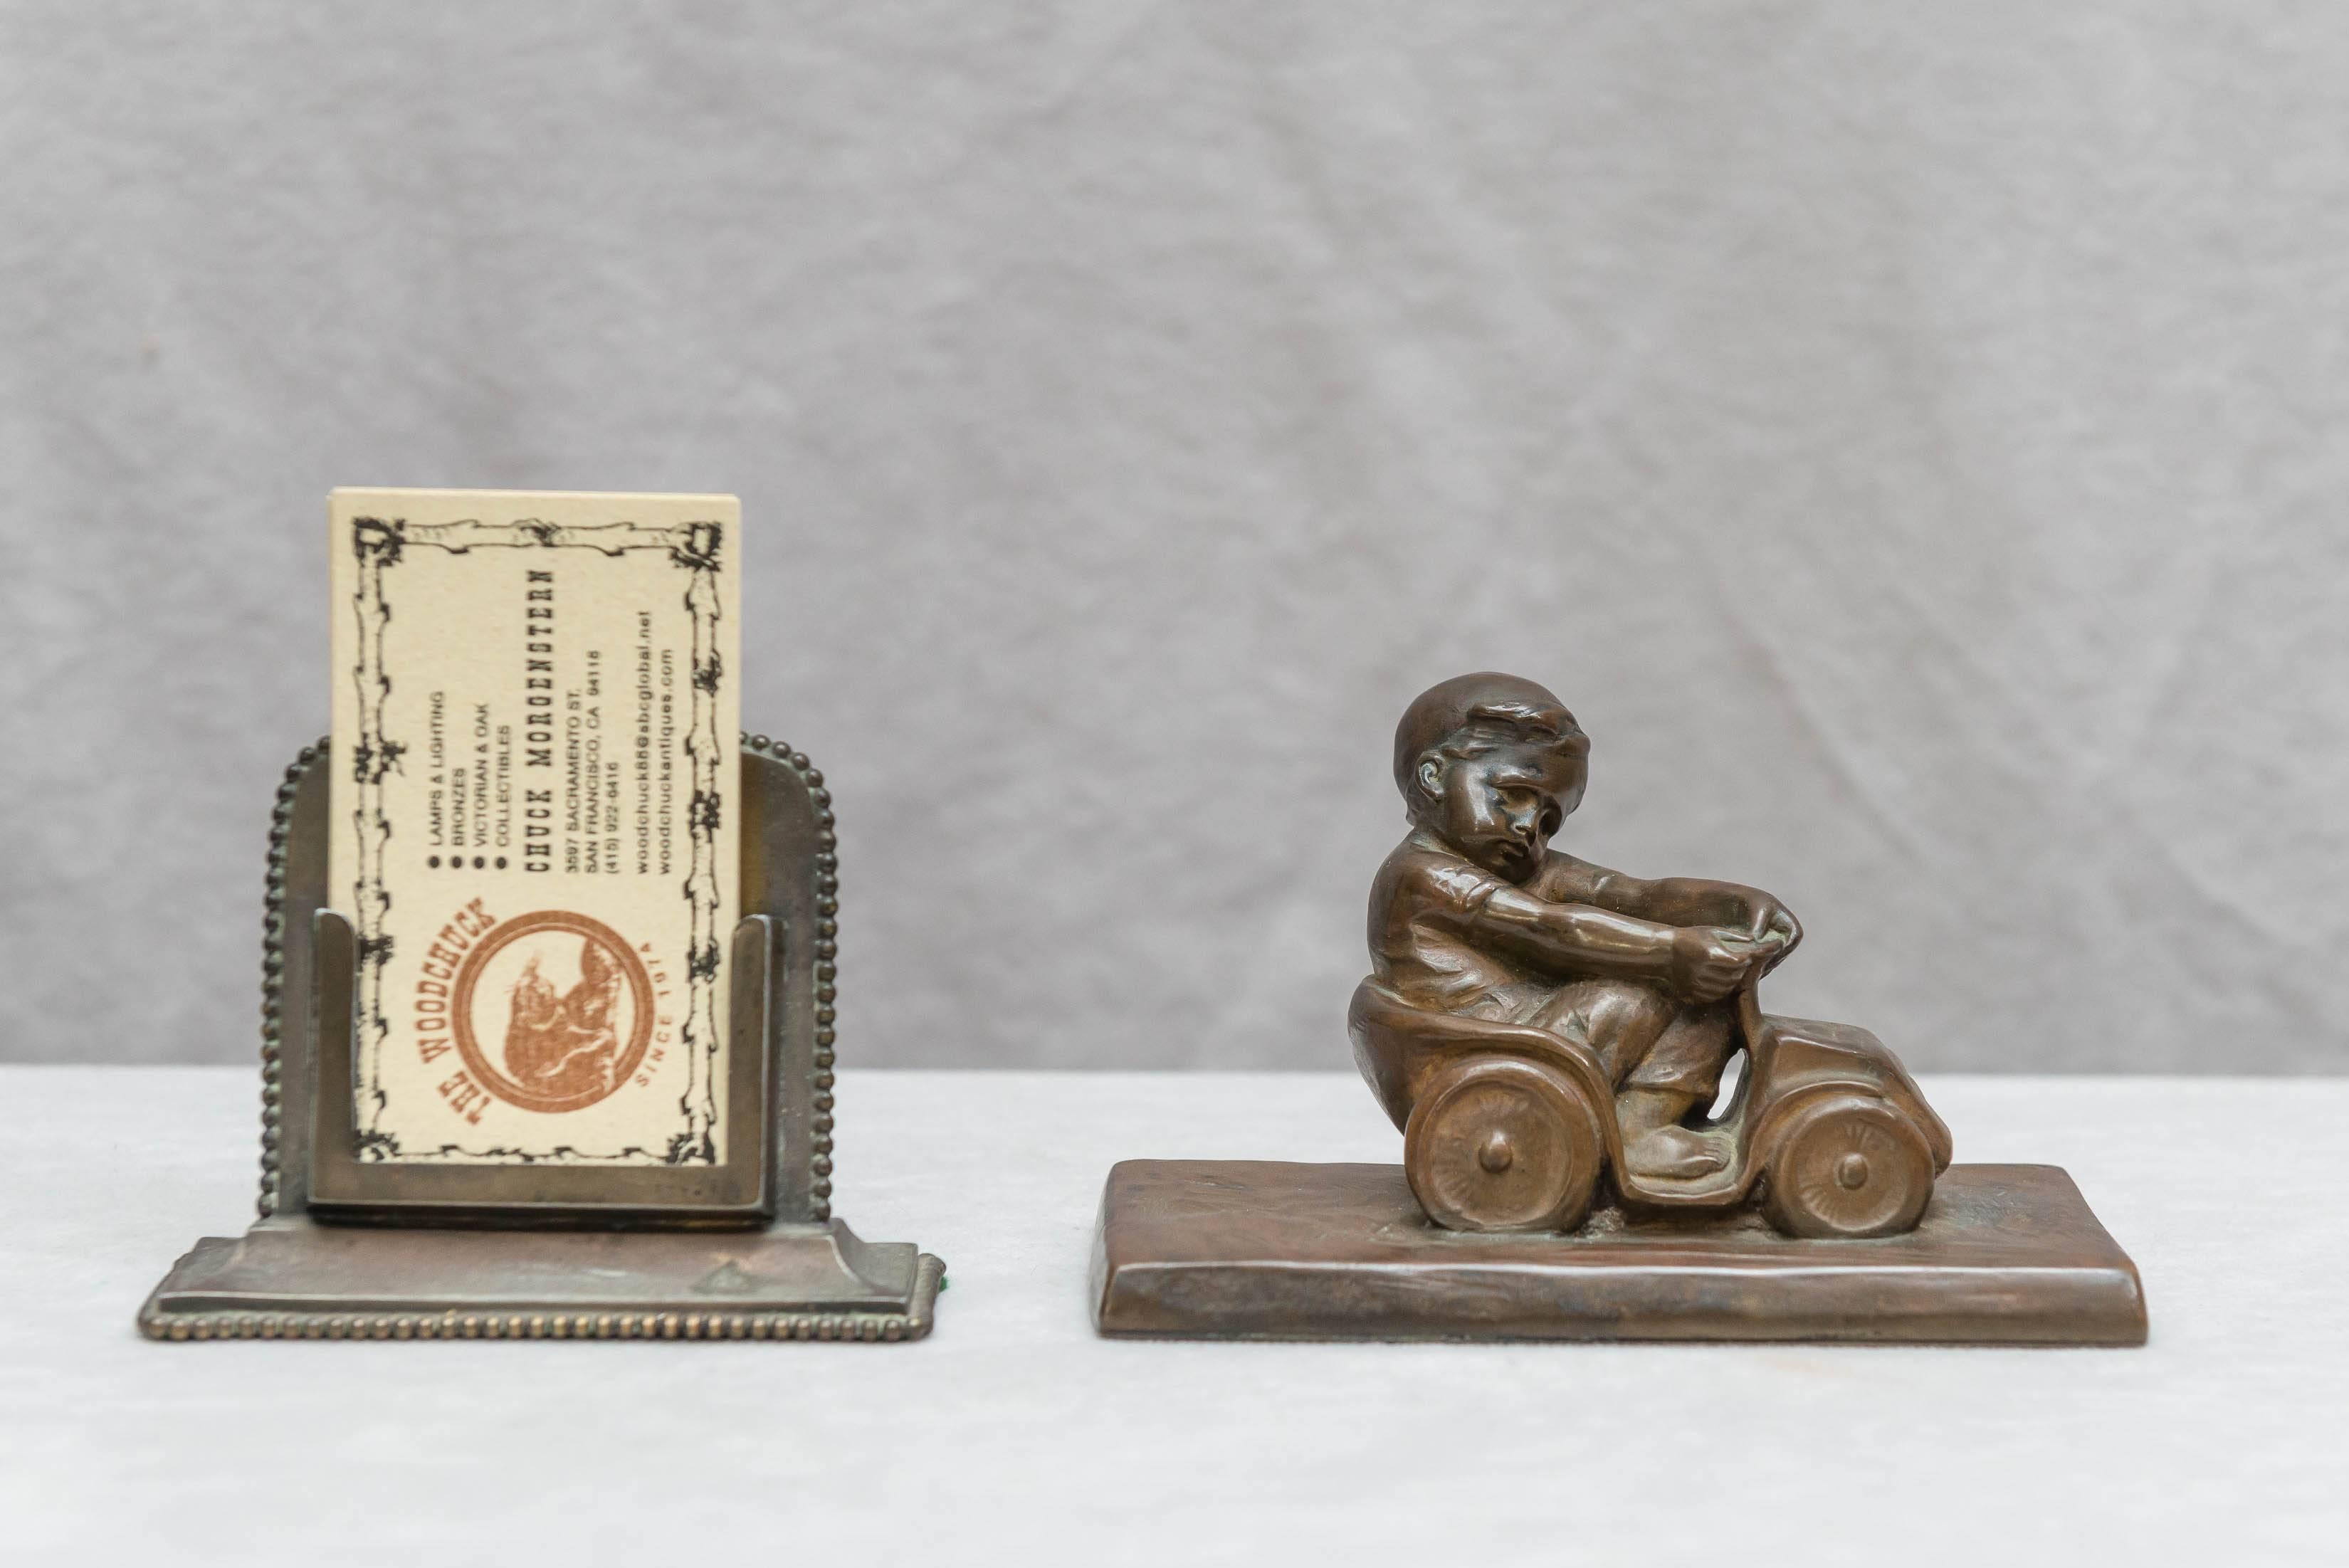 Wonderful example of whimsy in this adorable bronze. Artist signed by the noted Austrian artist Teresczczuk. Makes a great little desk item. A very unusual little gem.